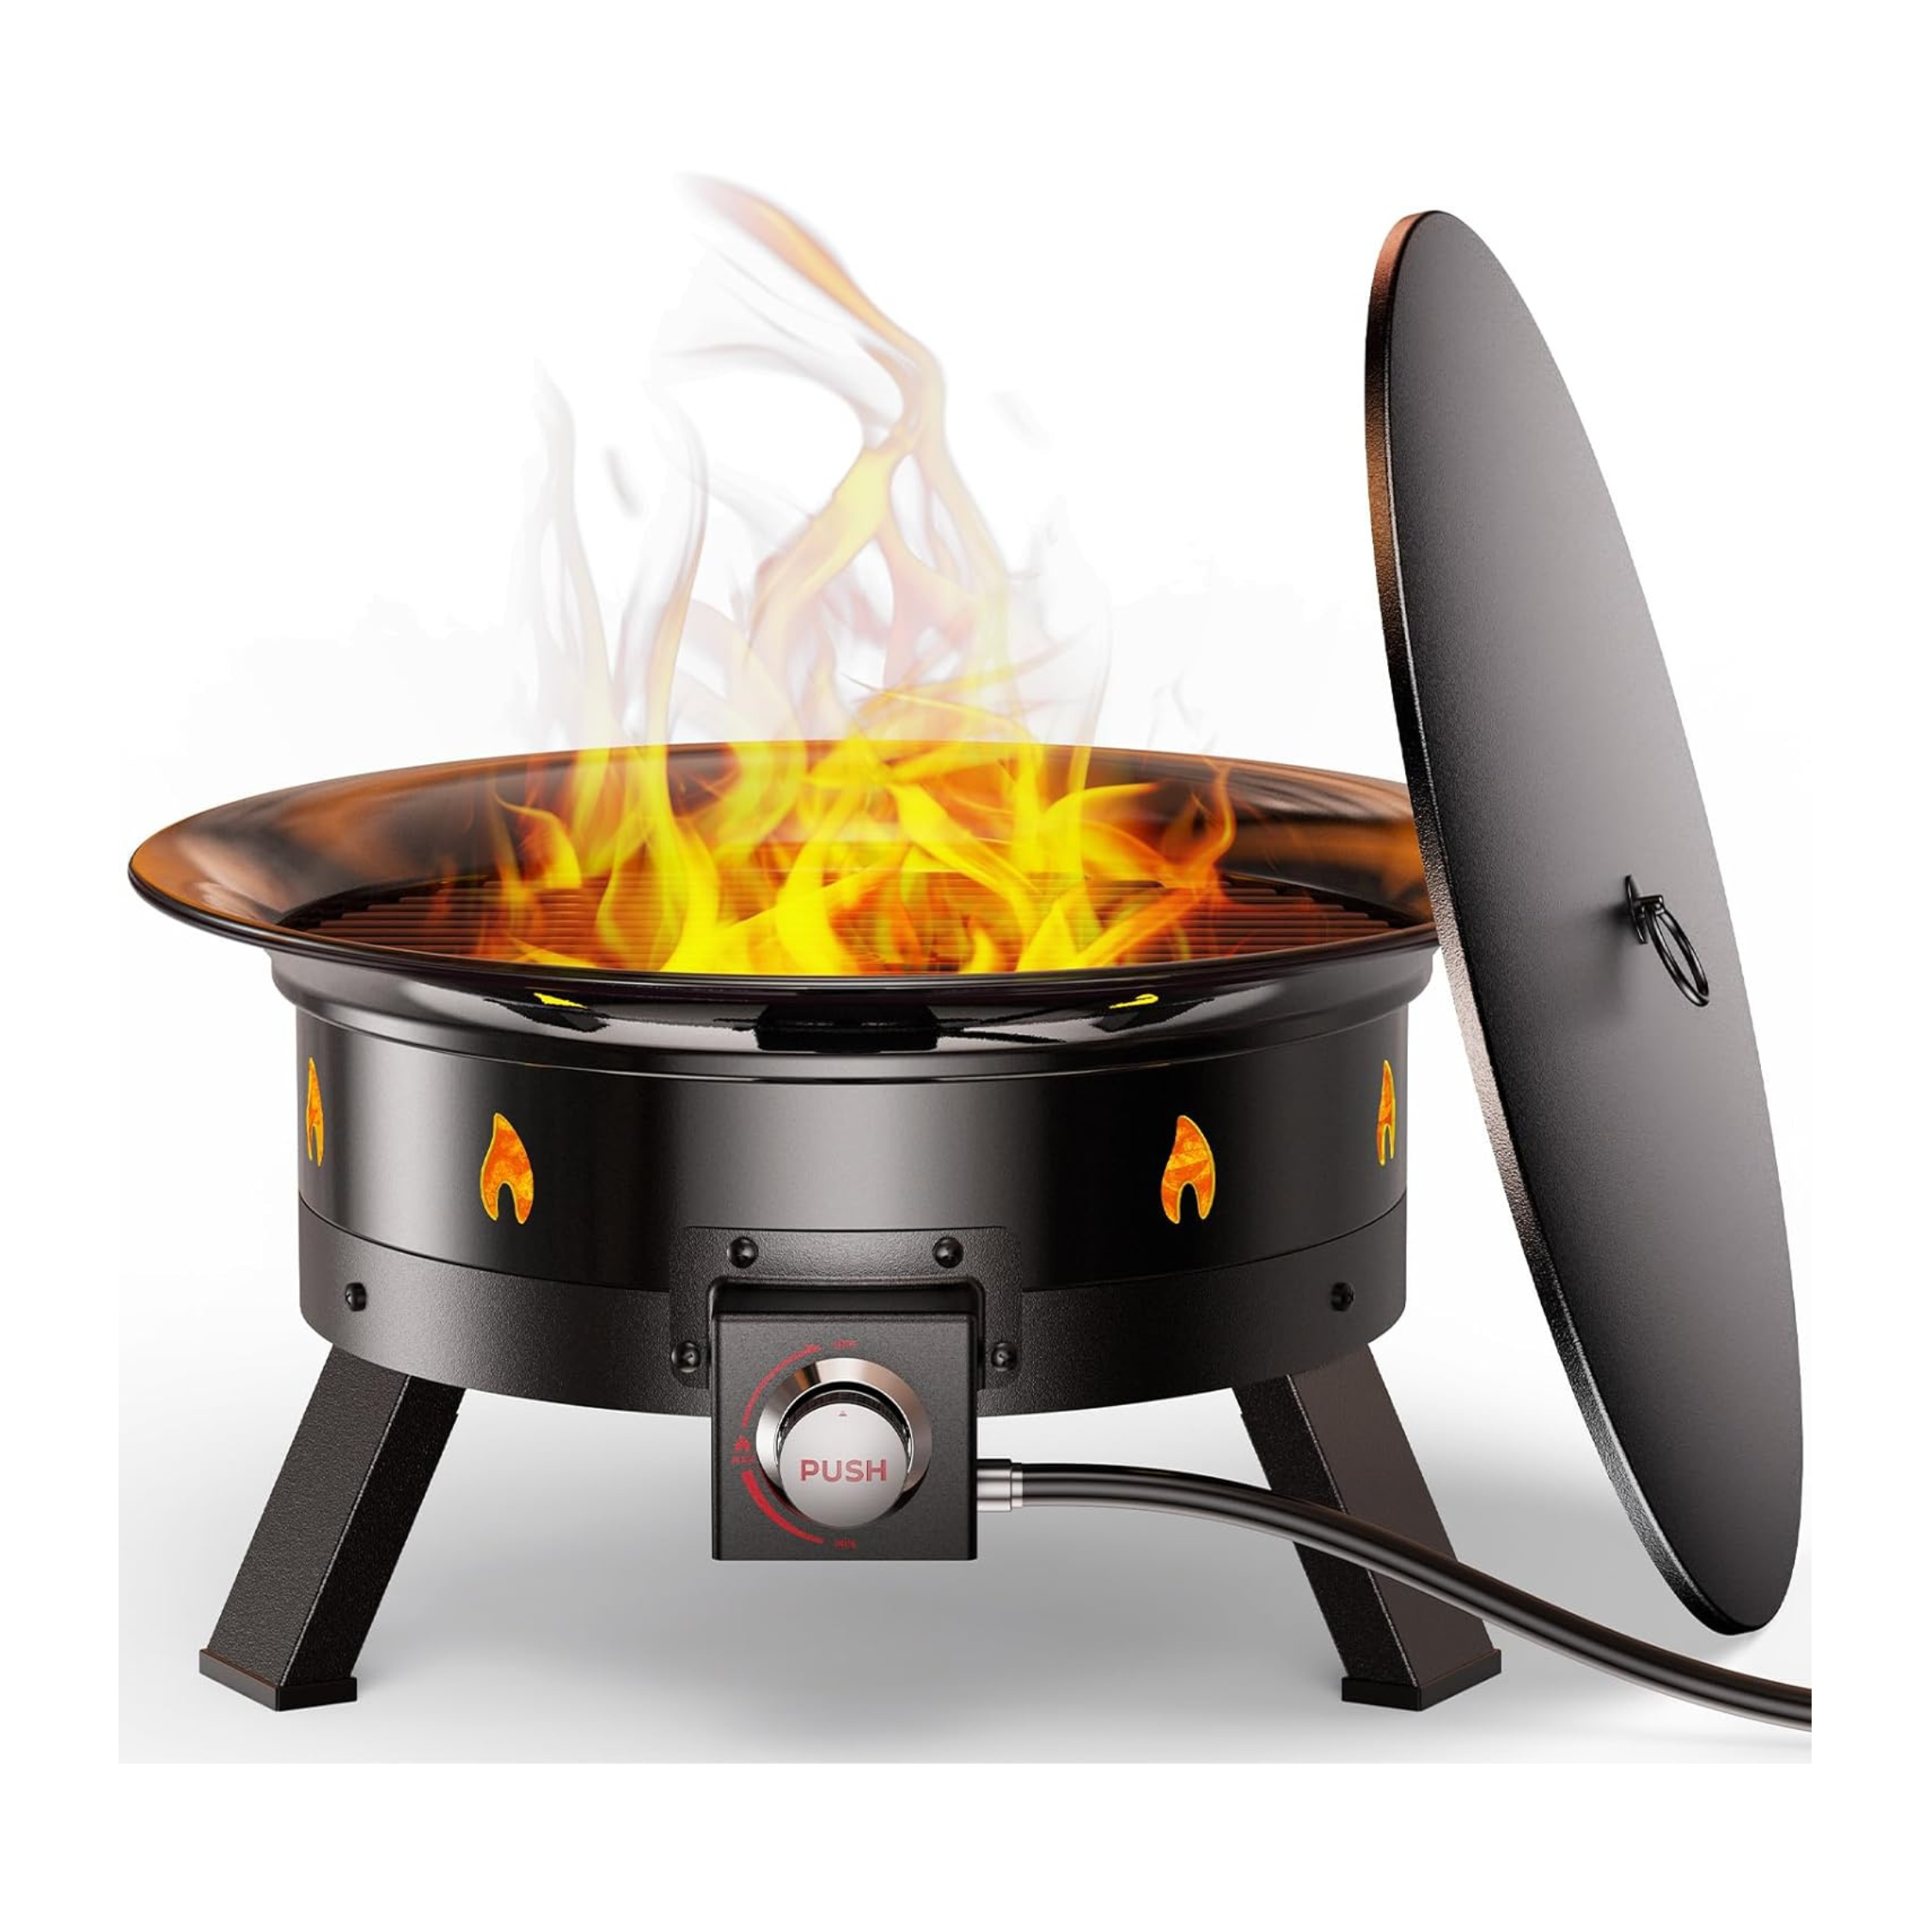 Portable Propane Gas Fire Pit with Folding Legs